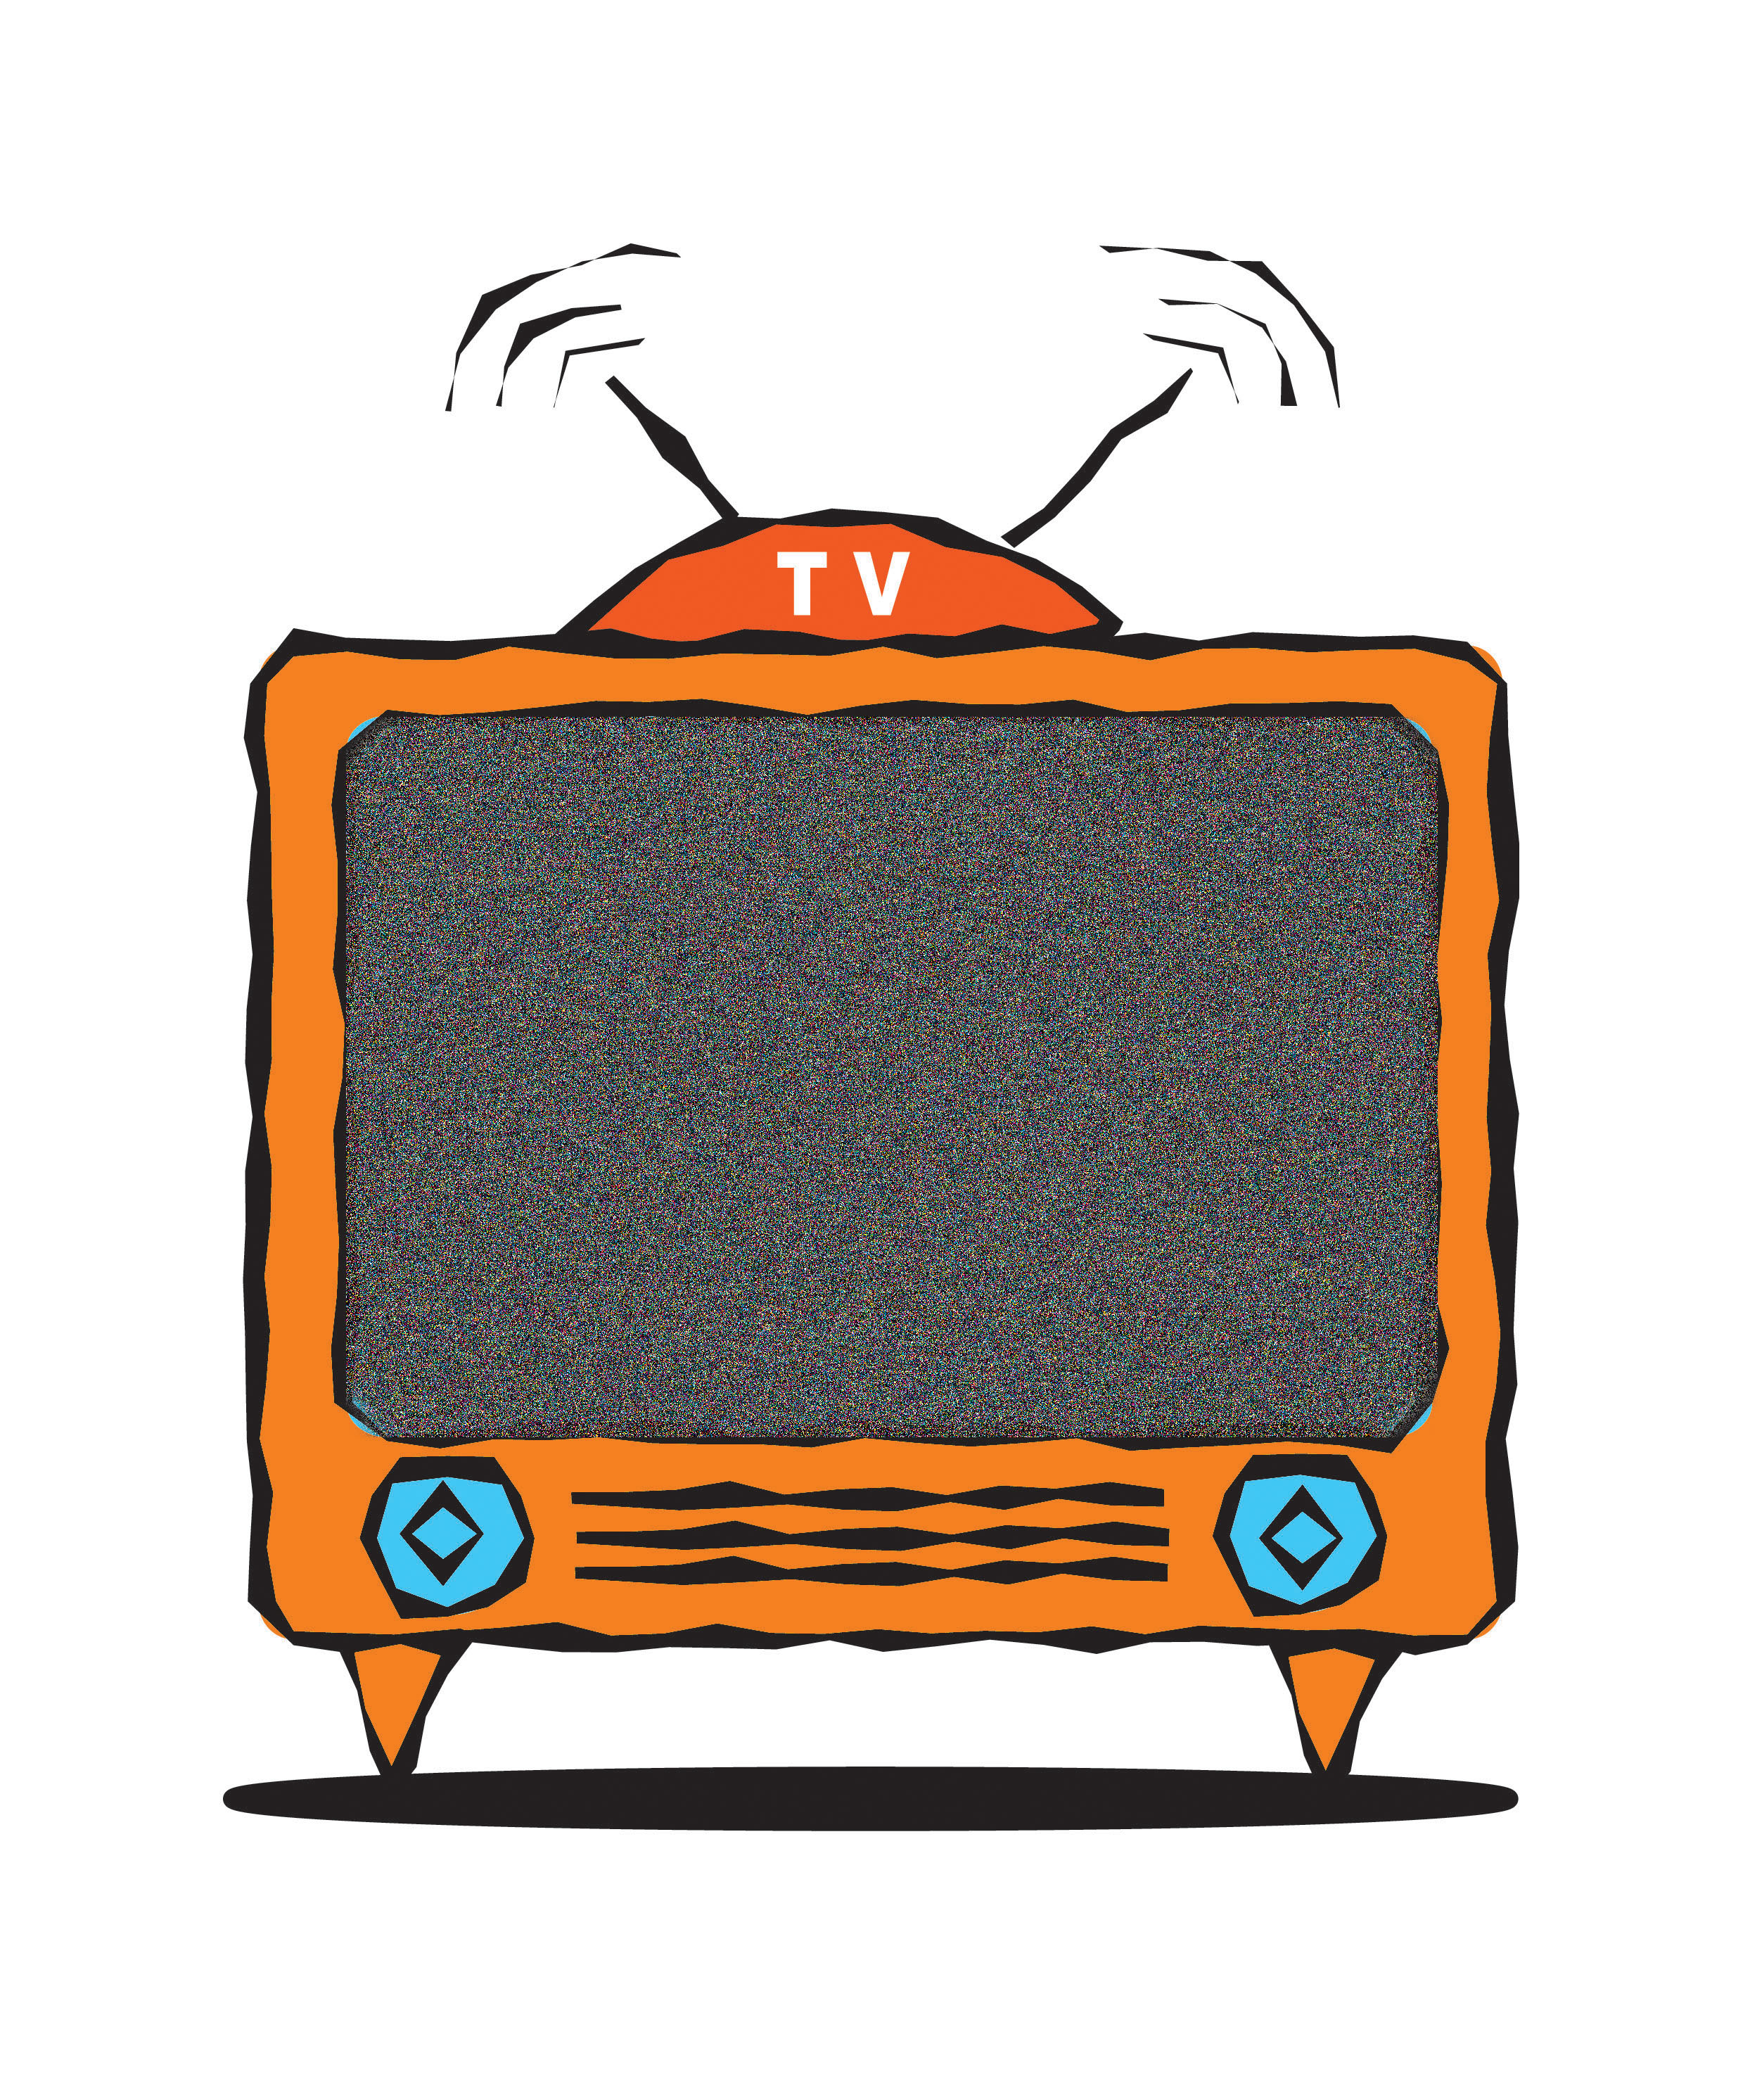 watch television clipart - photo #37